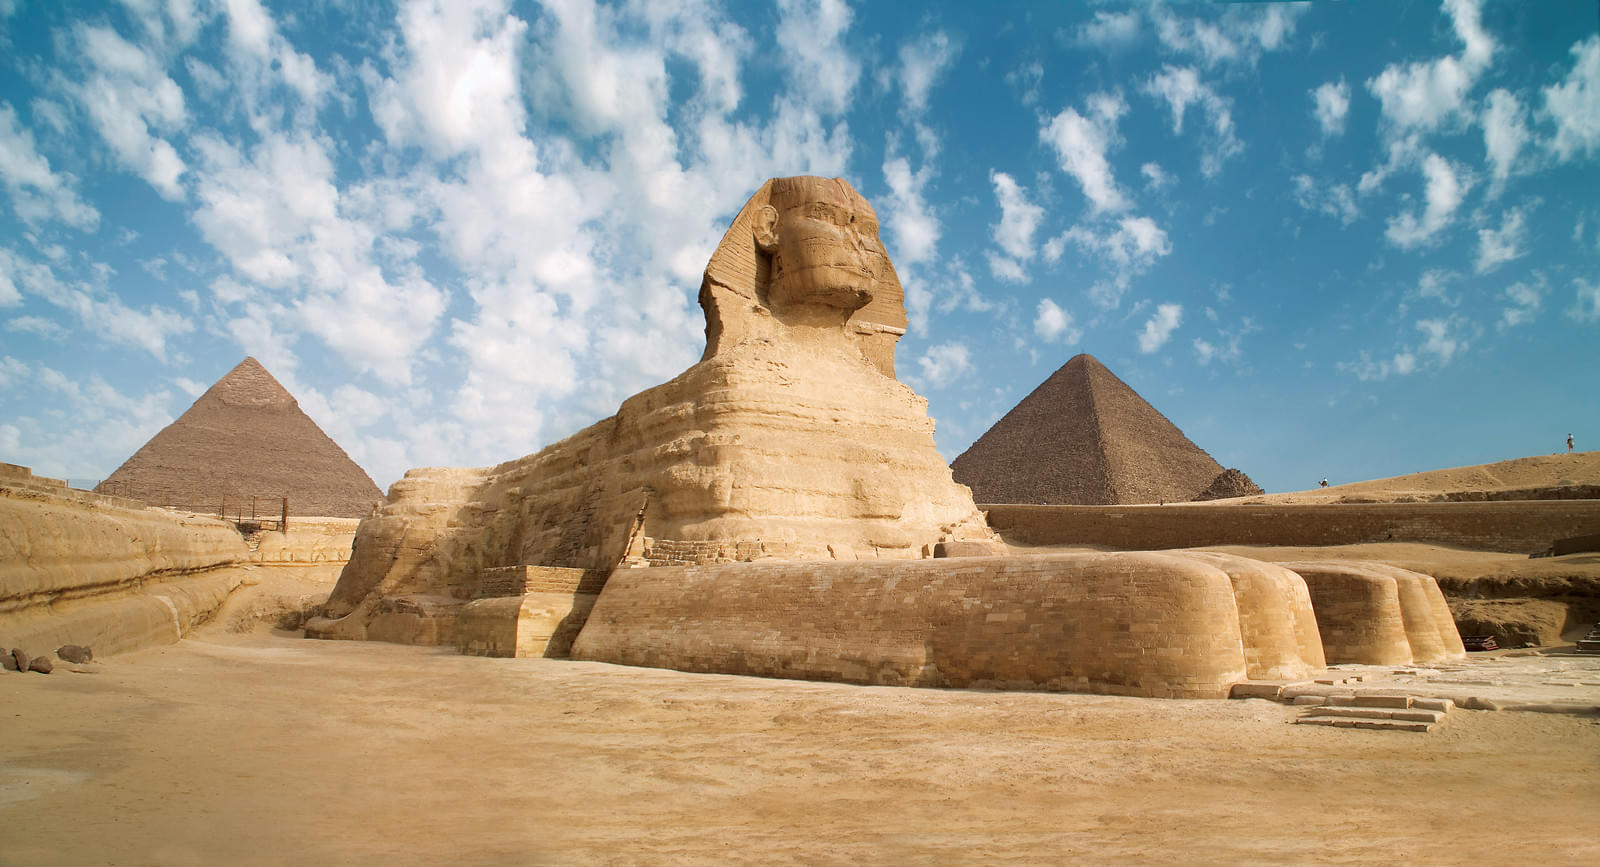 Marvel at the Sphinx